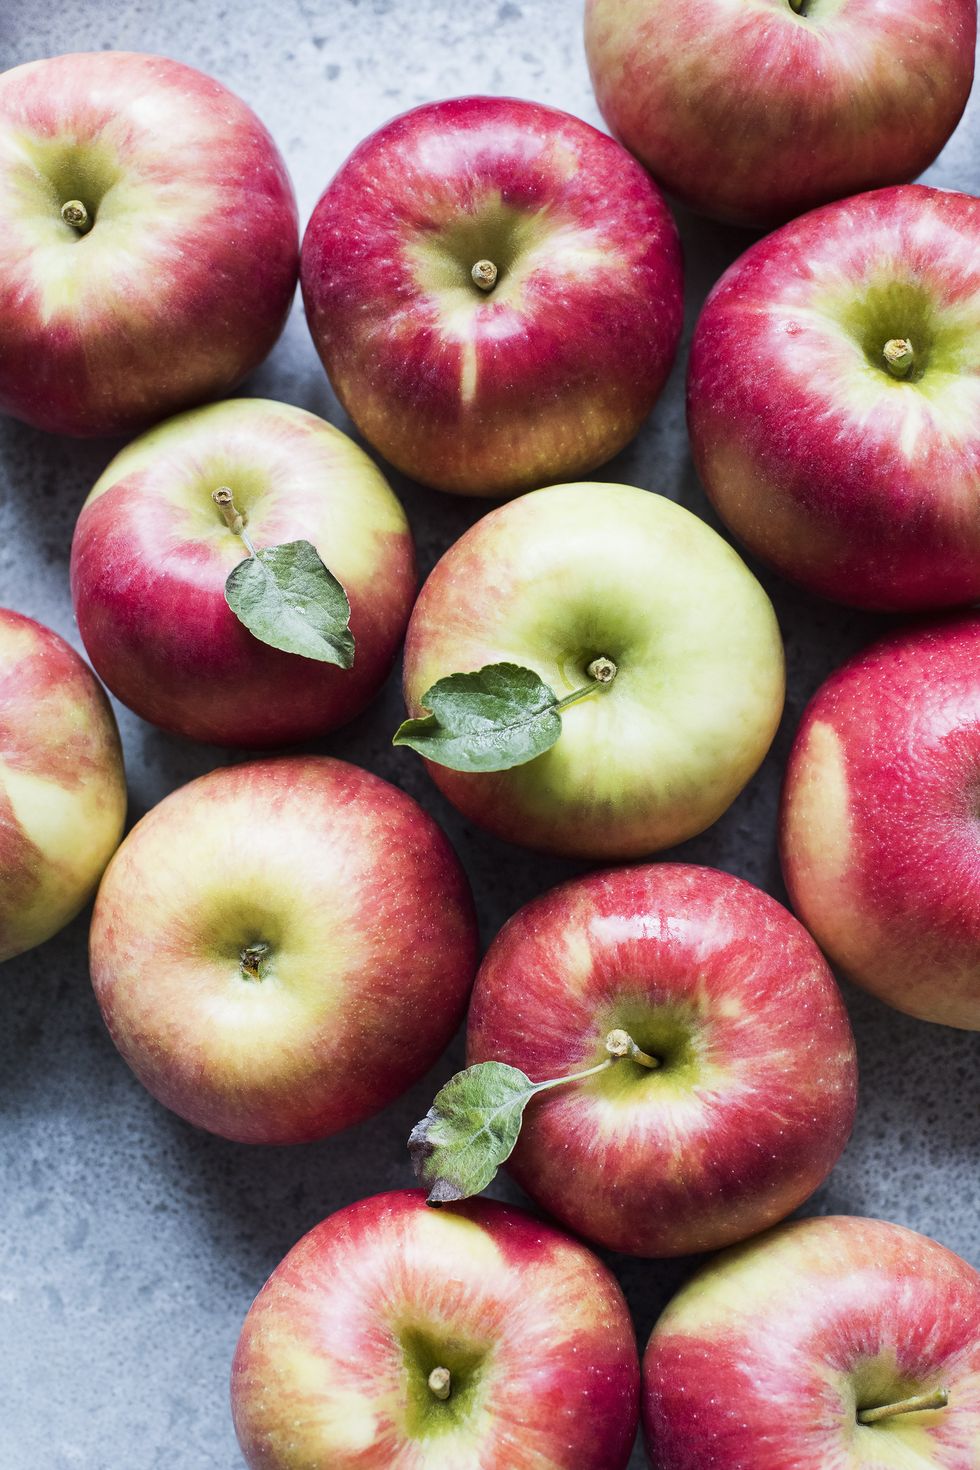 Best Apples to Bake With 